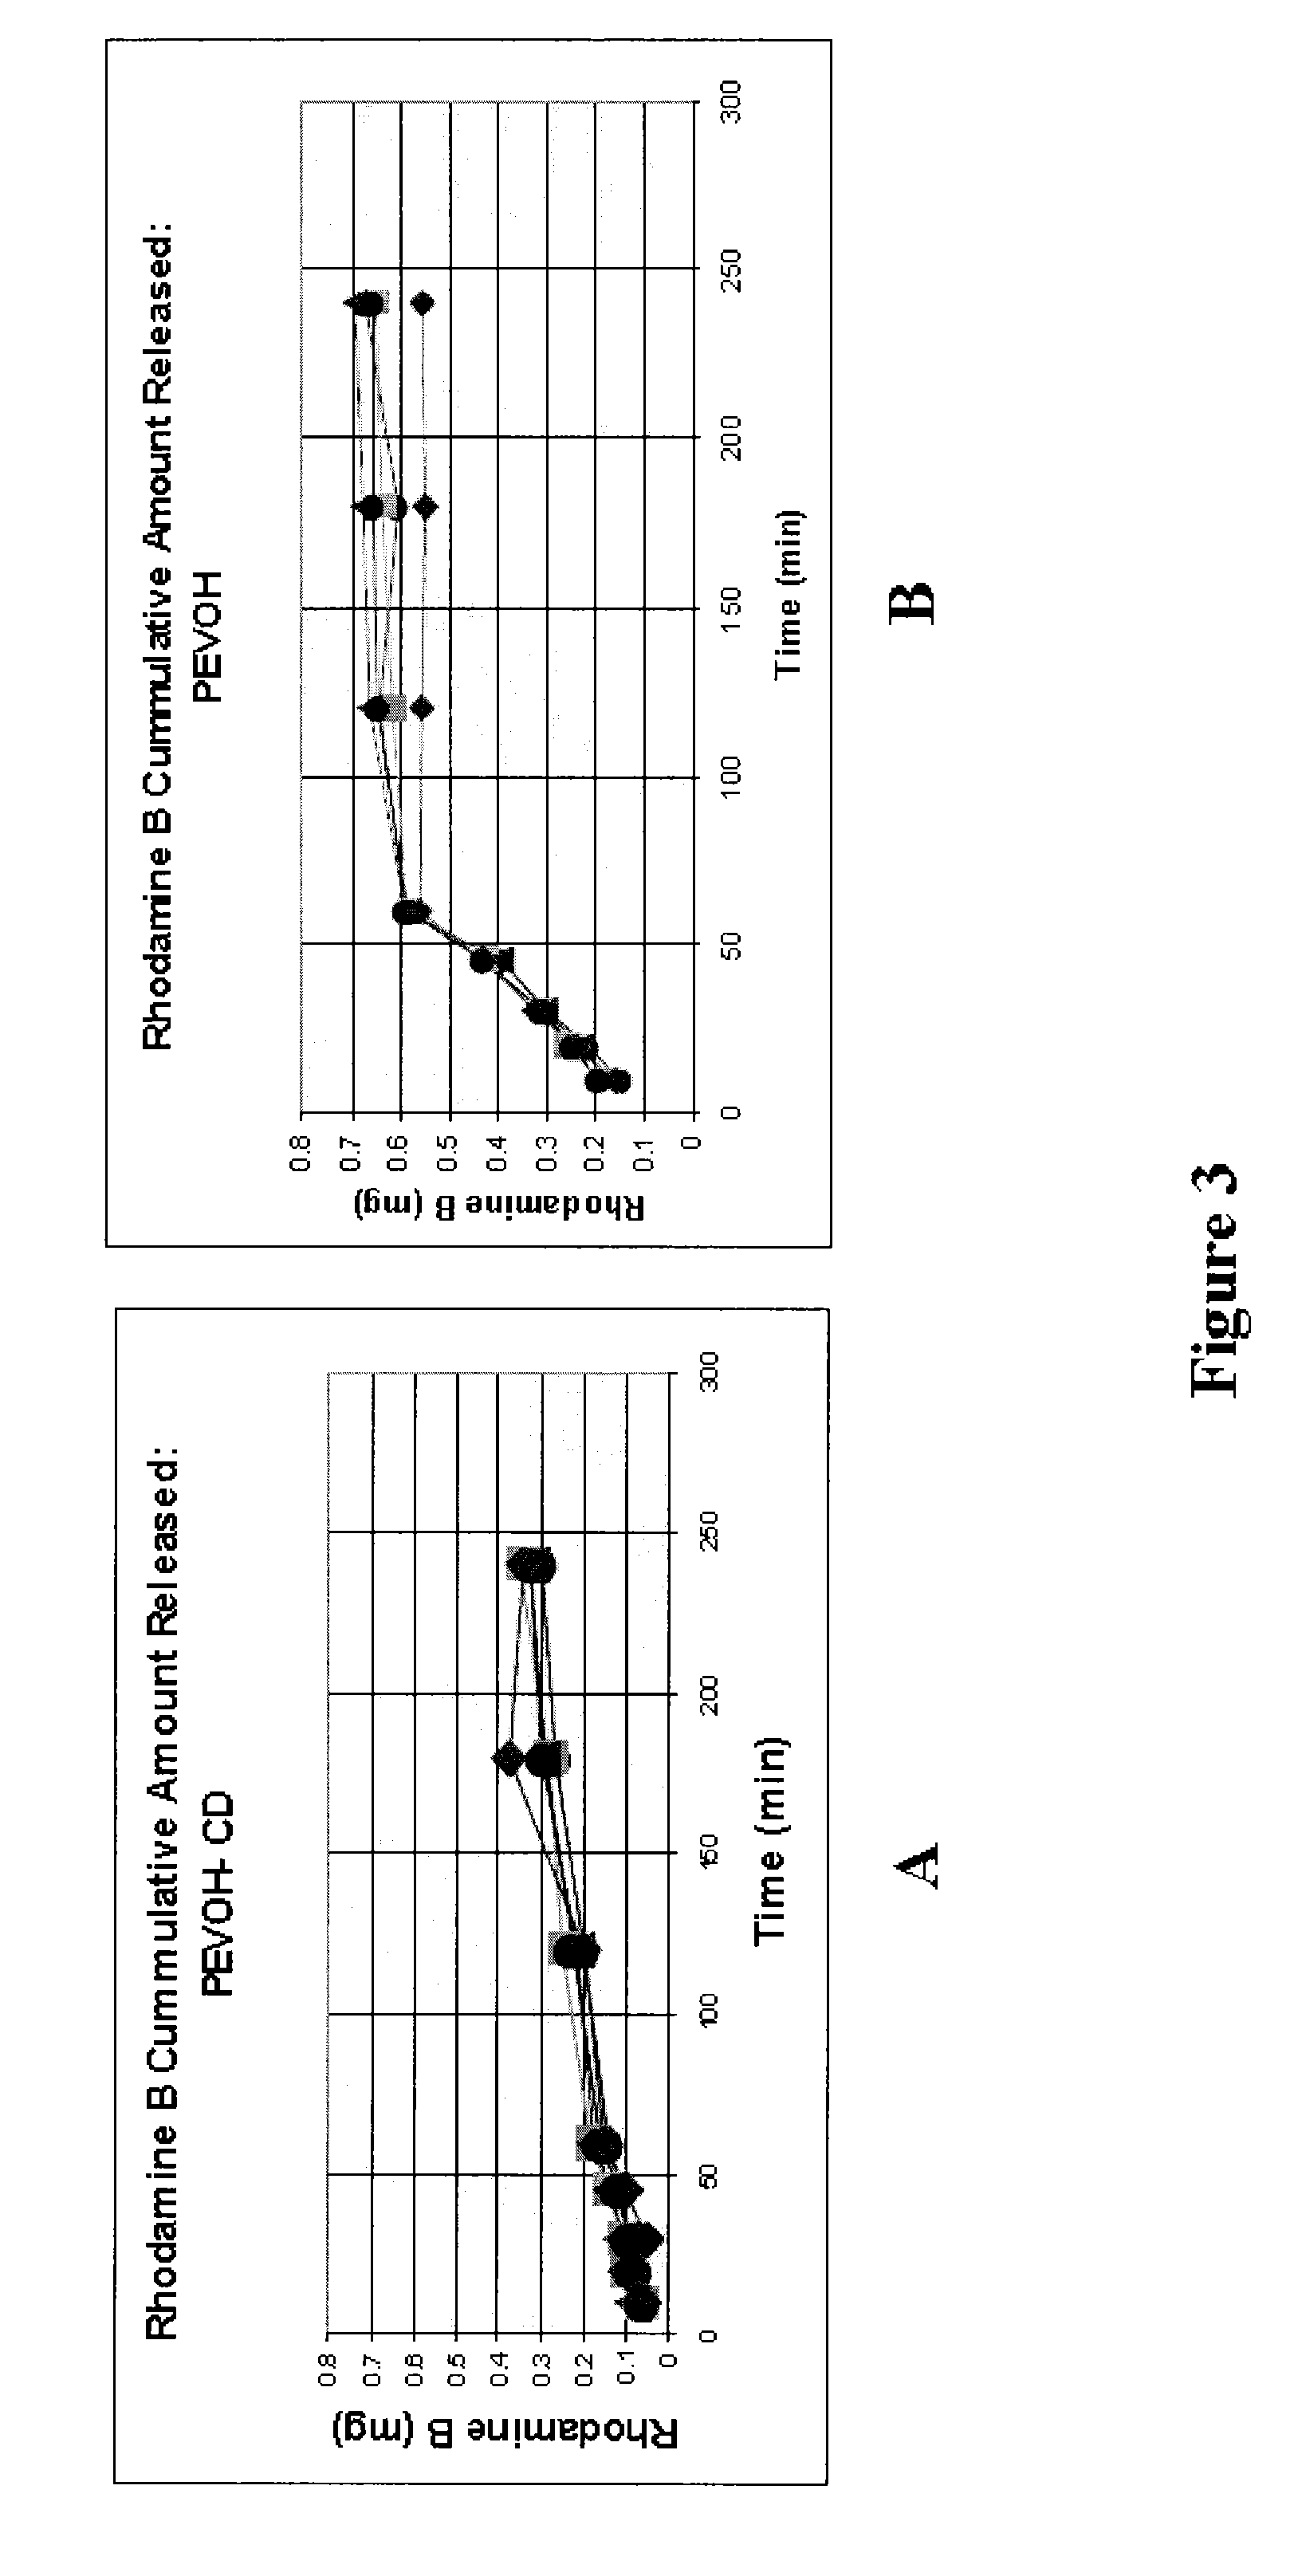 Therapeutic agent delivery system and method